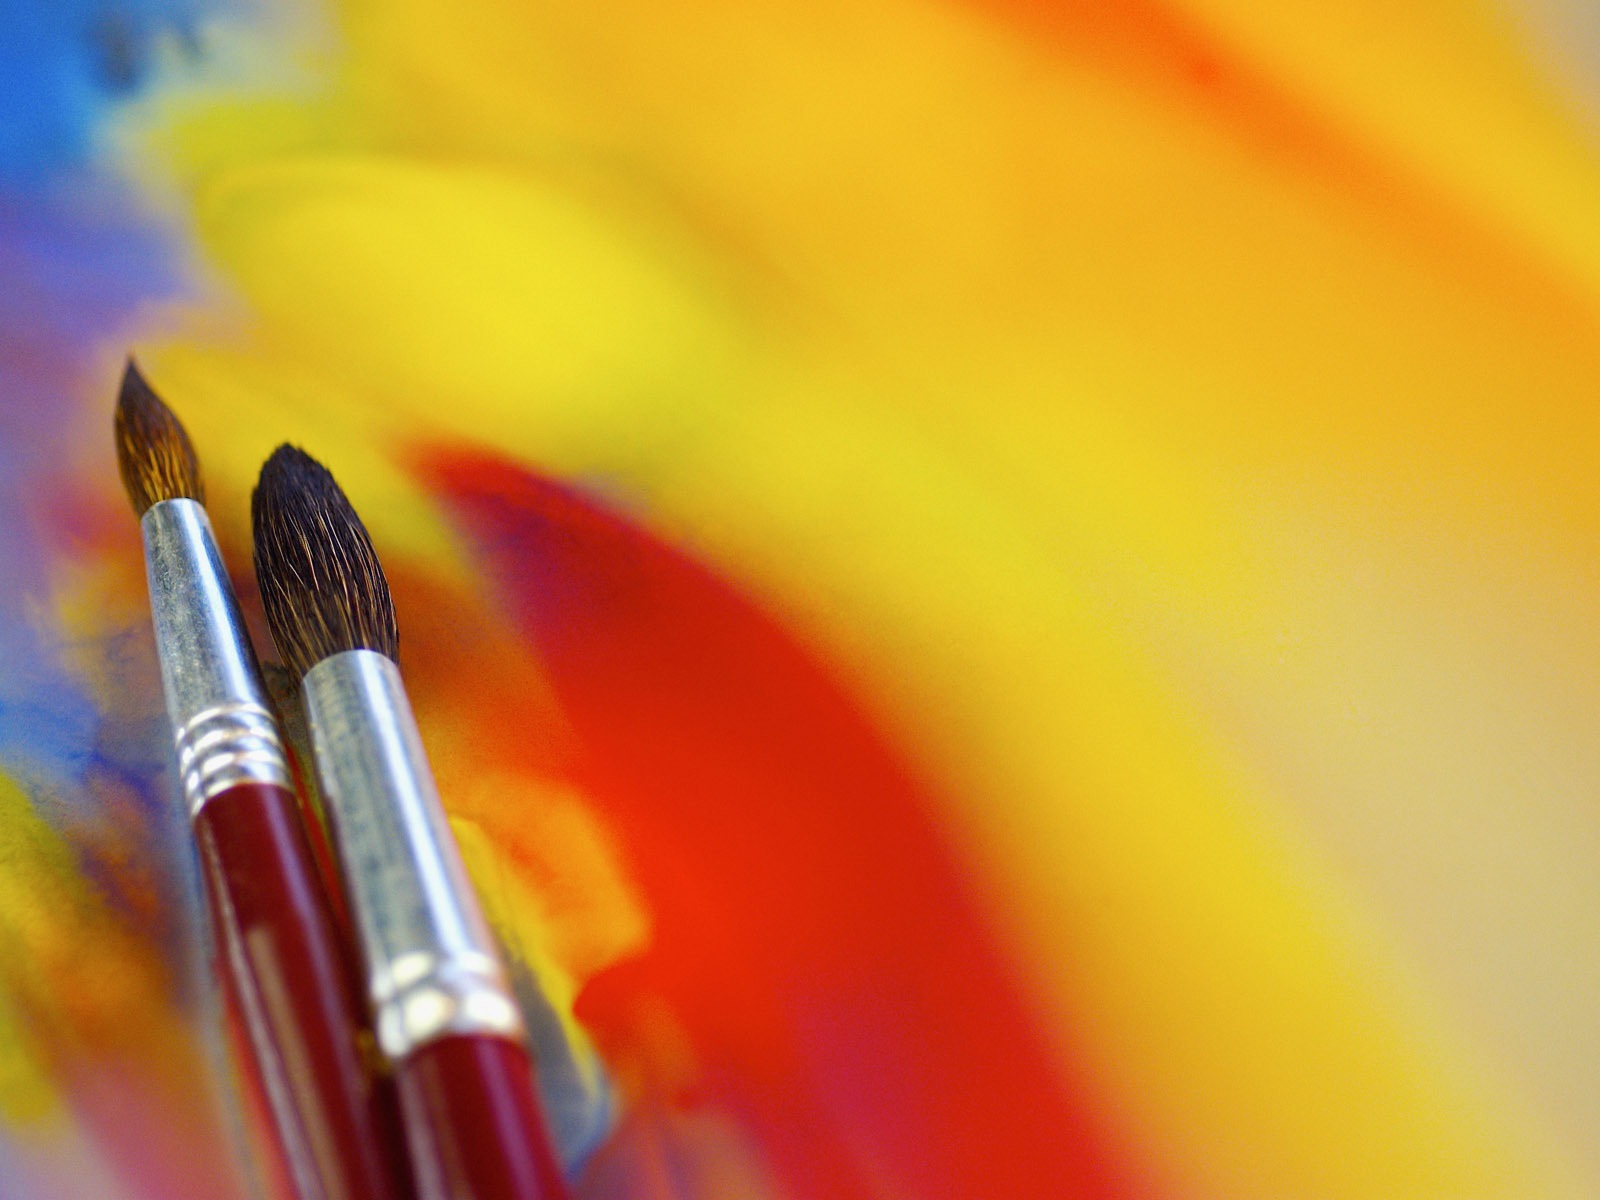 Colorful Wallpaper Paint Brushes 2 7 - Paint Brushes - HD Wallpaper 